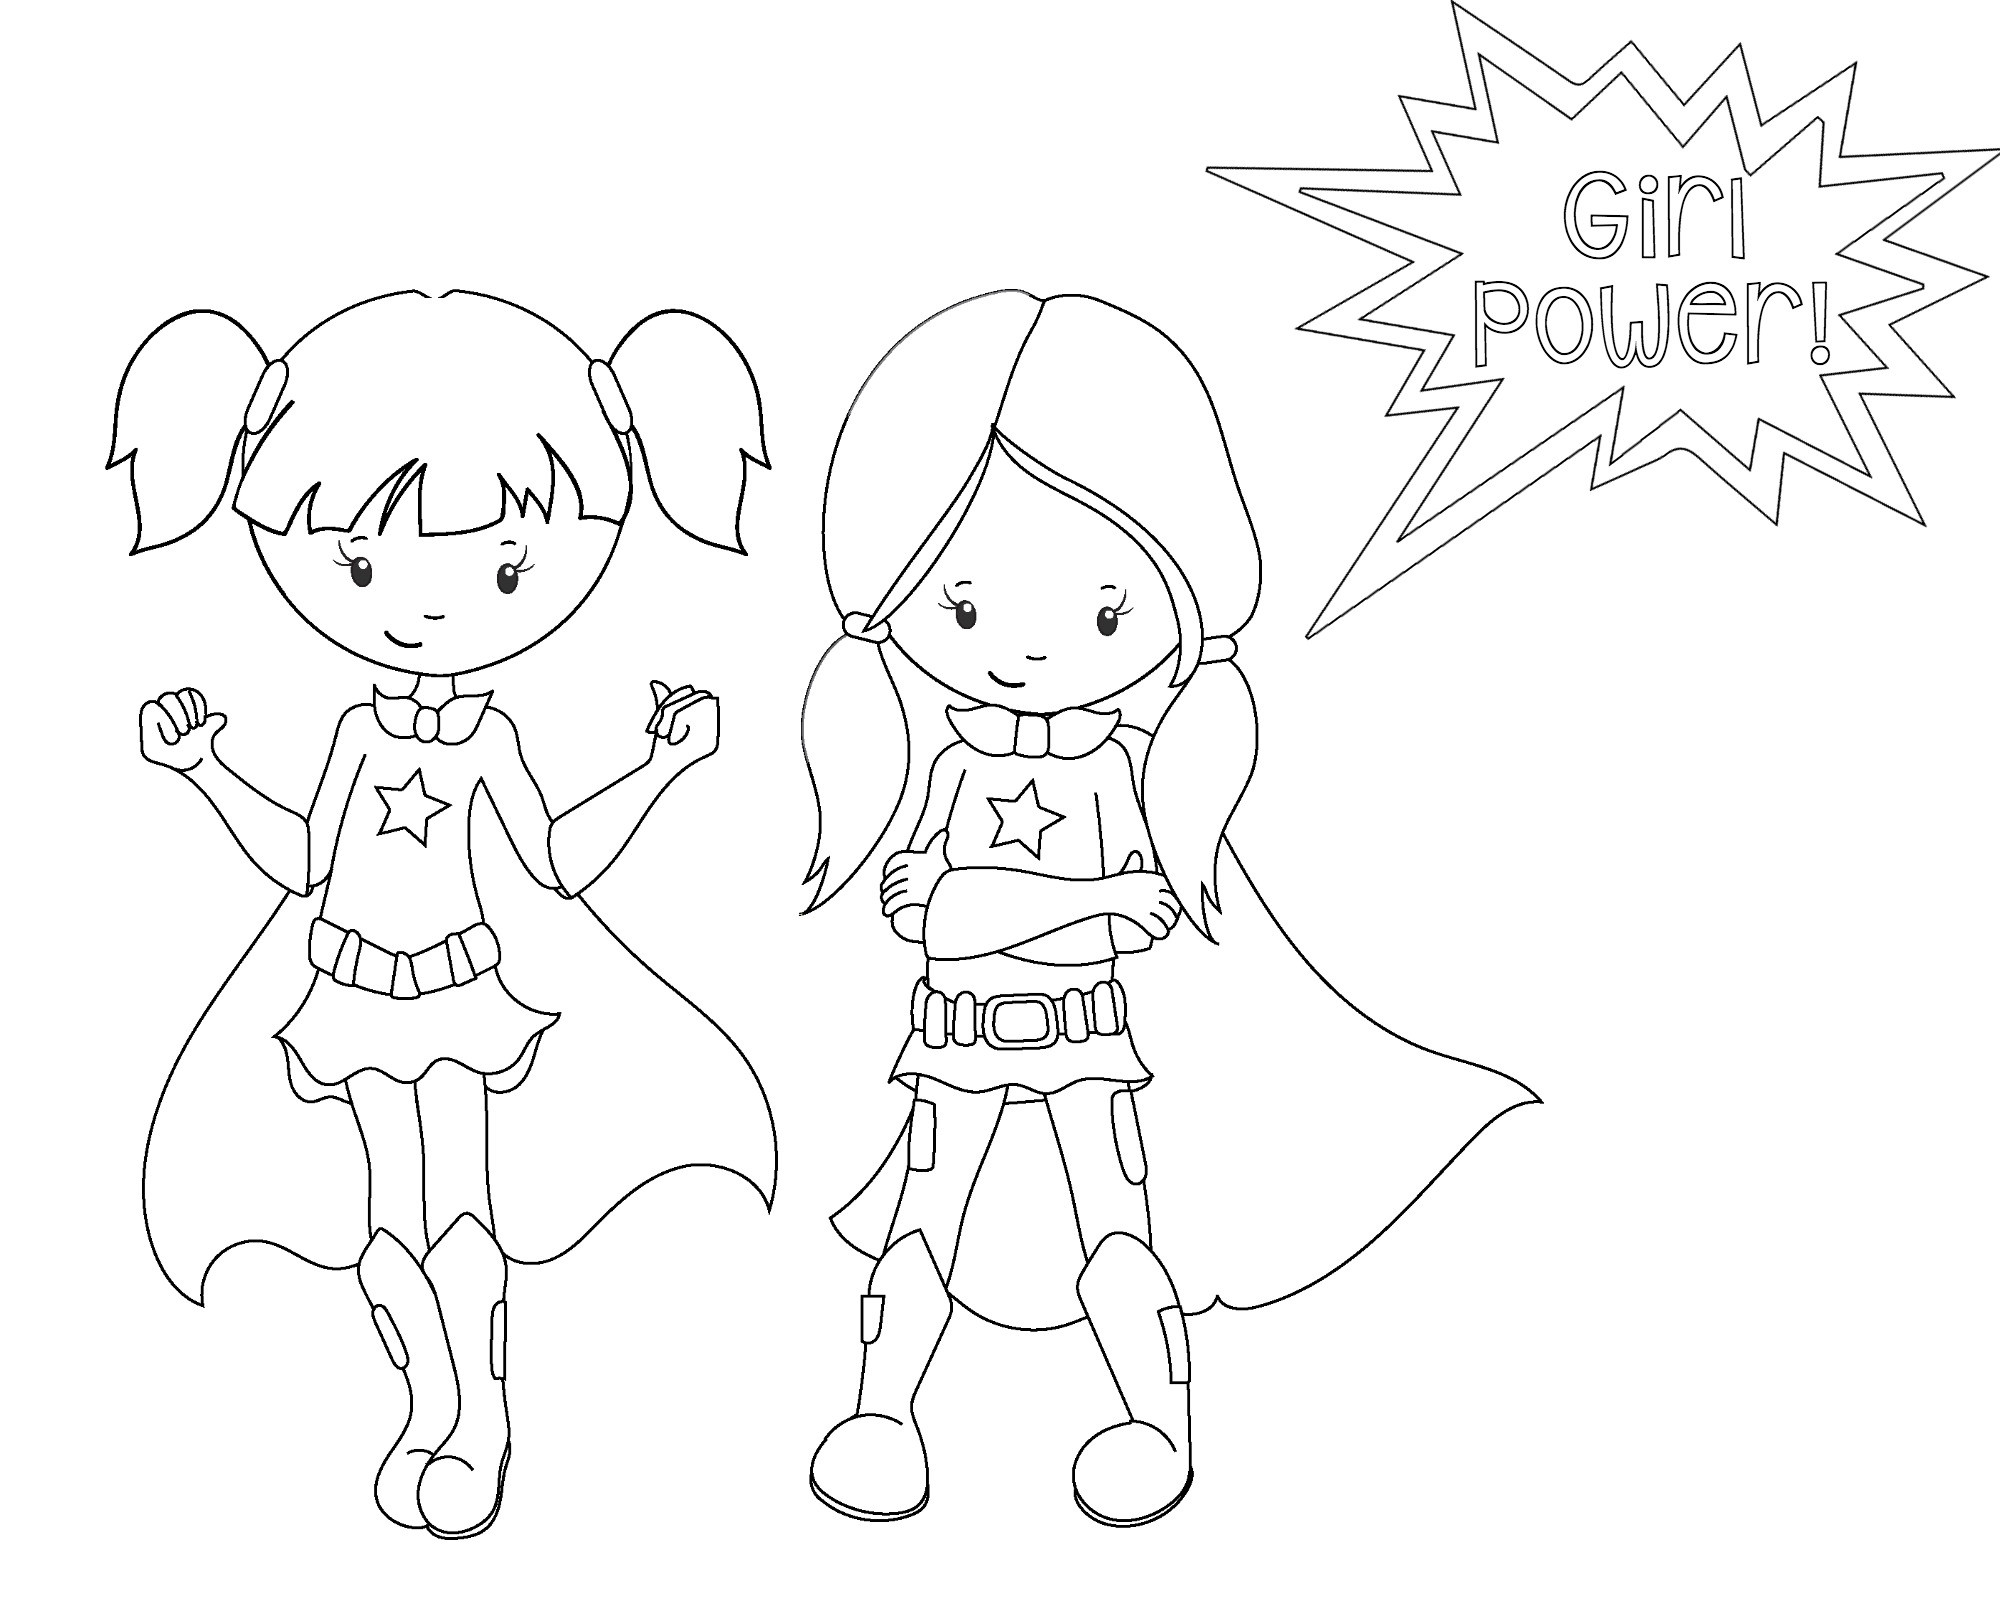 Superheroes Coloring Pages Printables
 Superhero Coloring Pages Crazy Little Projects